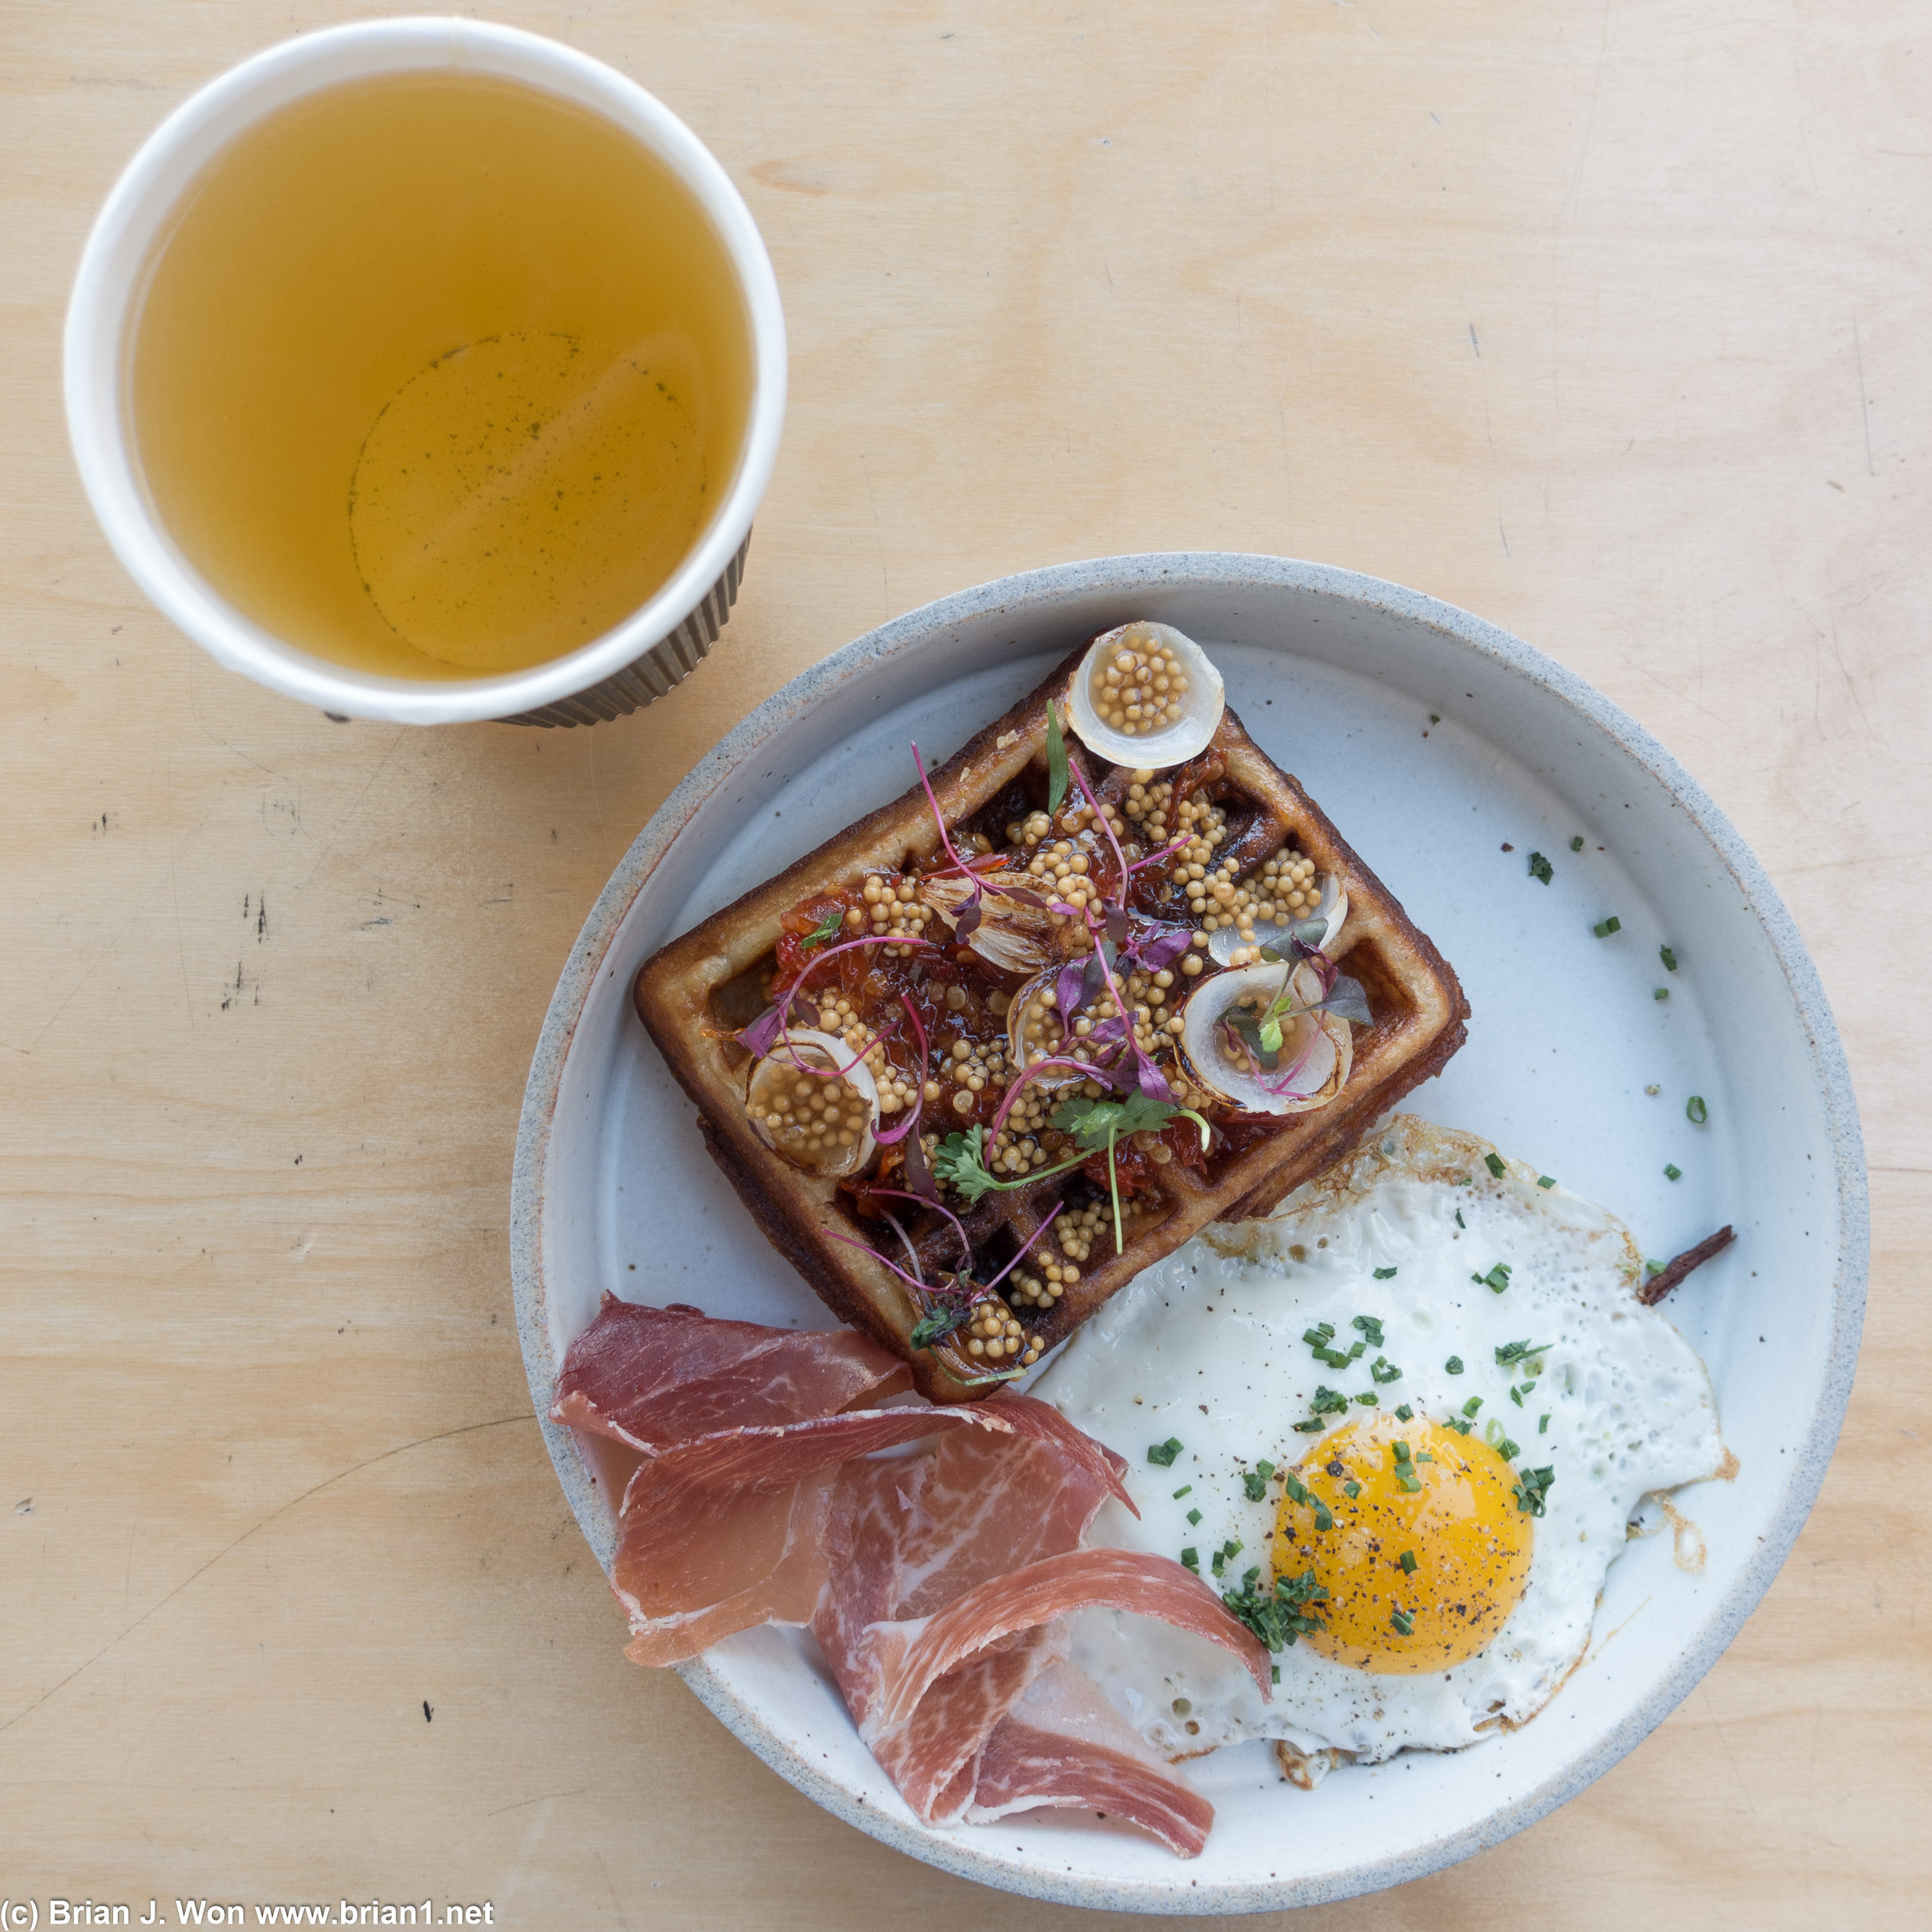 Sourdough sunchoke waffle. Would never have thought of a savory waffle quite like this..